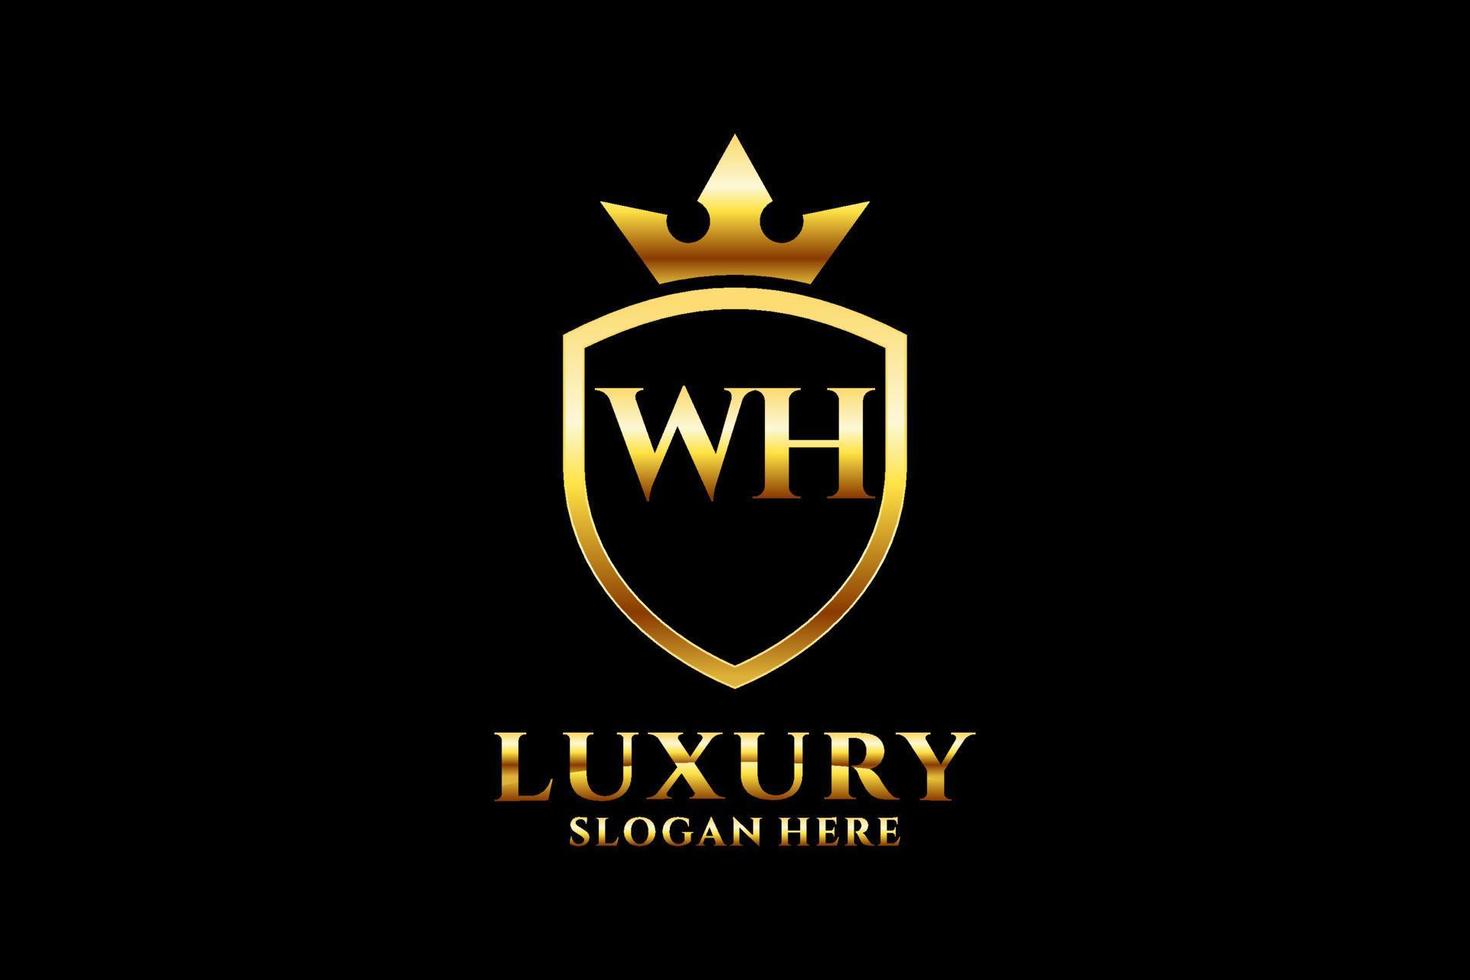 initial WH elegant luxury monogram logo or badge template with scrolls and royal crown - perfect for luxurious branding projects vector